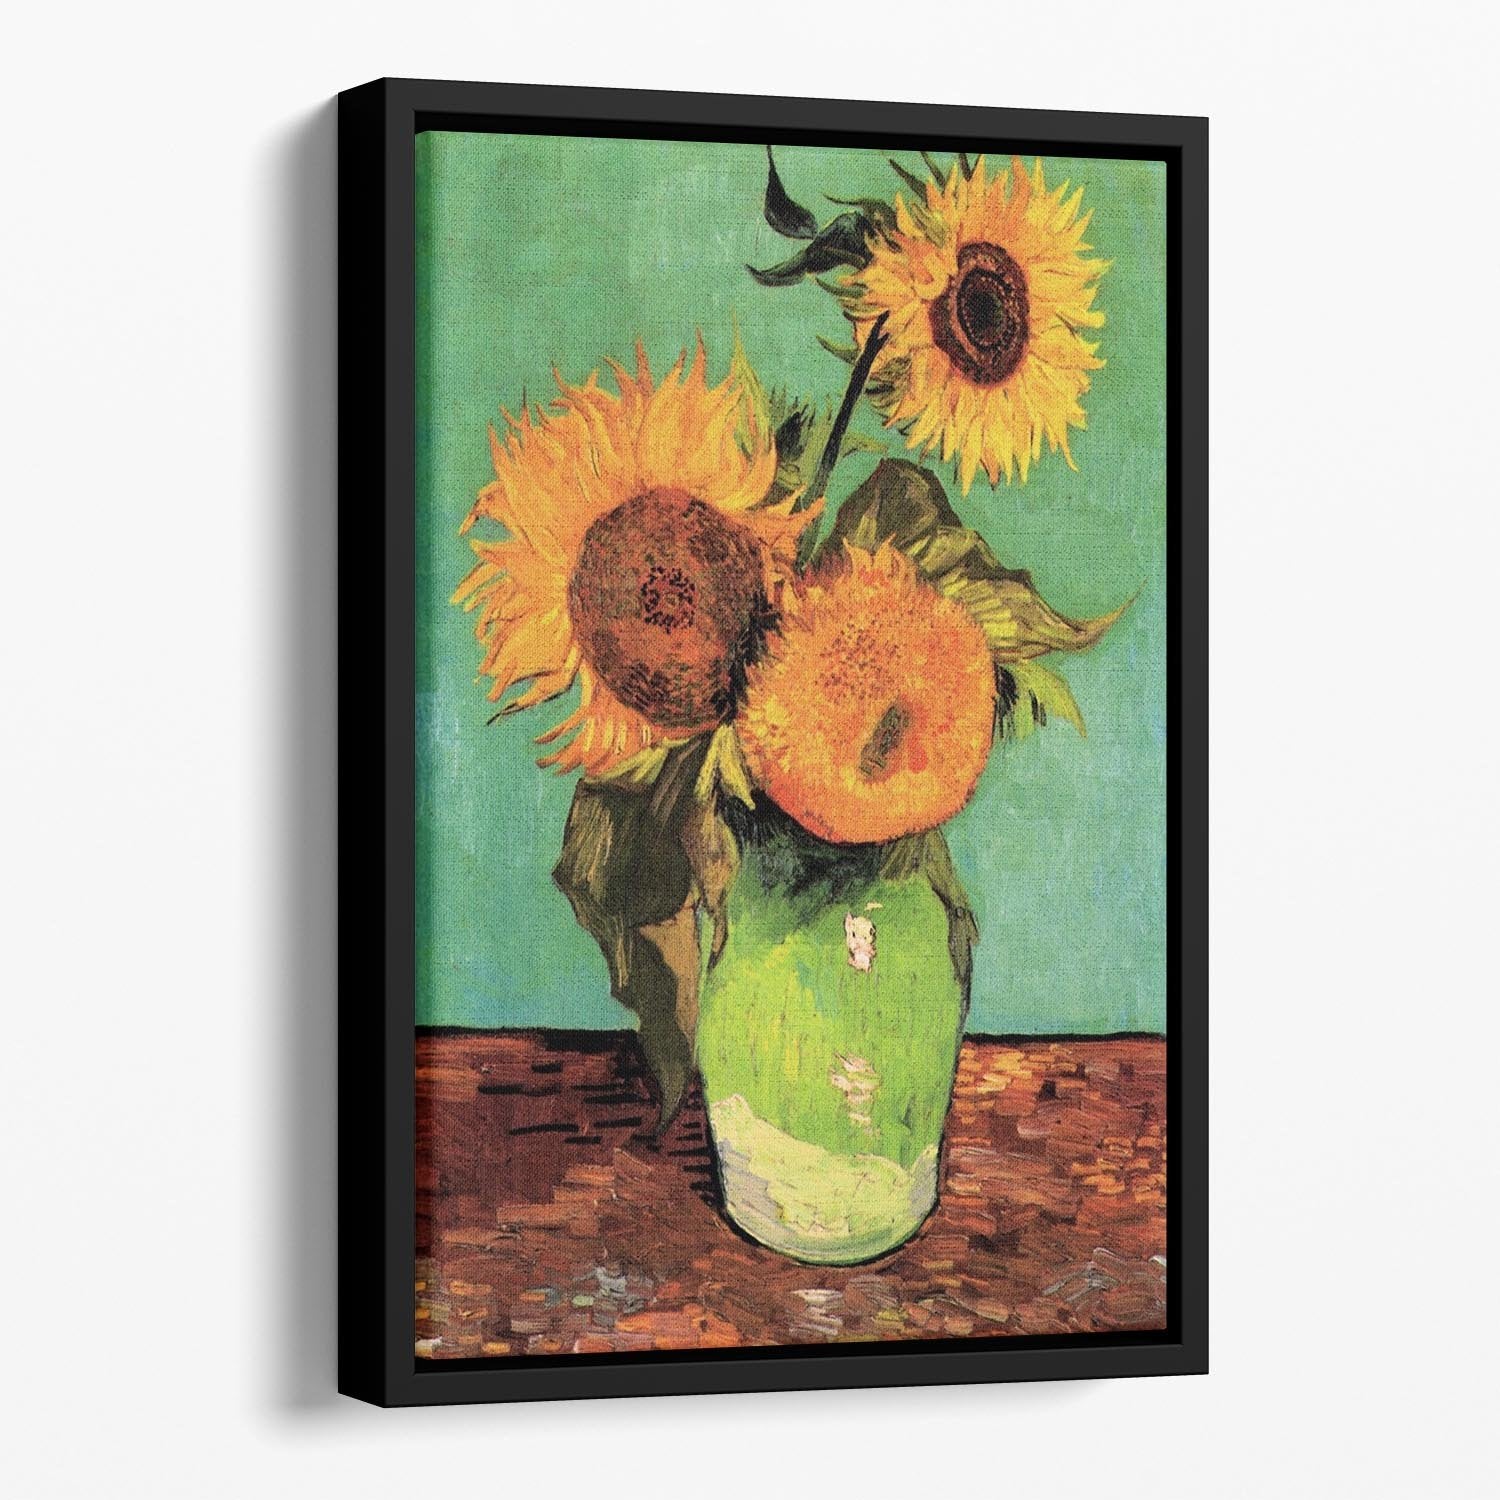 Three Sunflowers in a Vase by Van Gogh Floating Framed Canvas